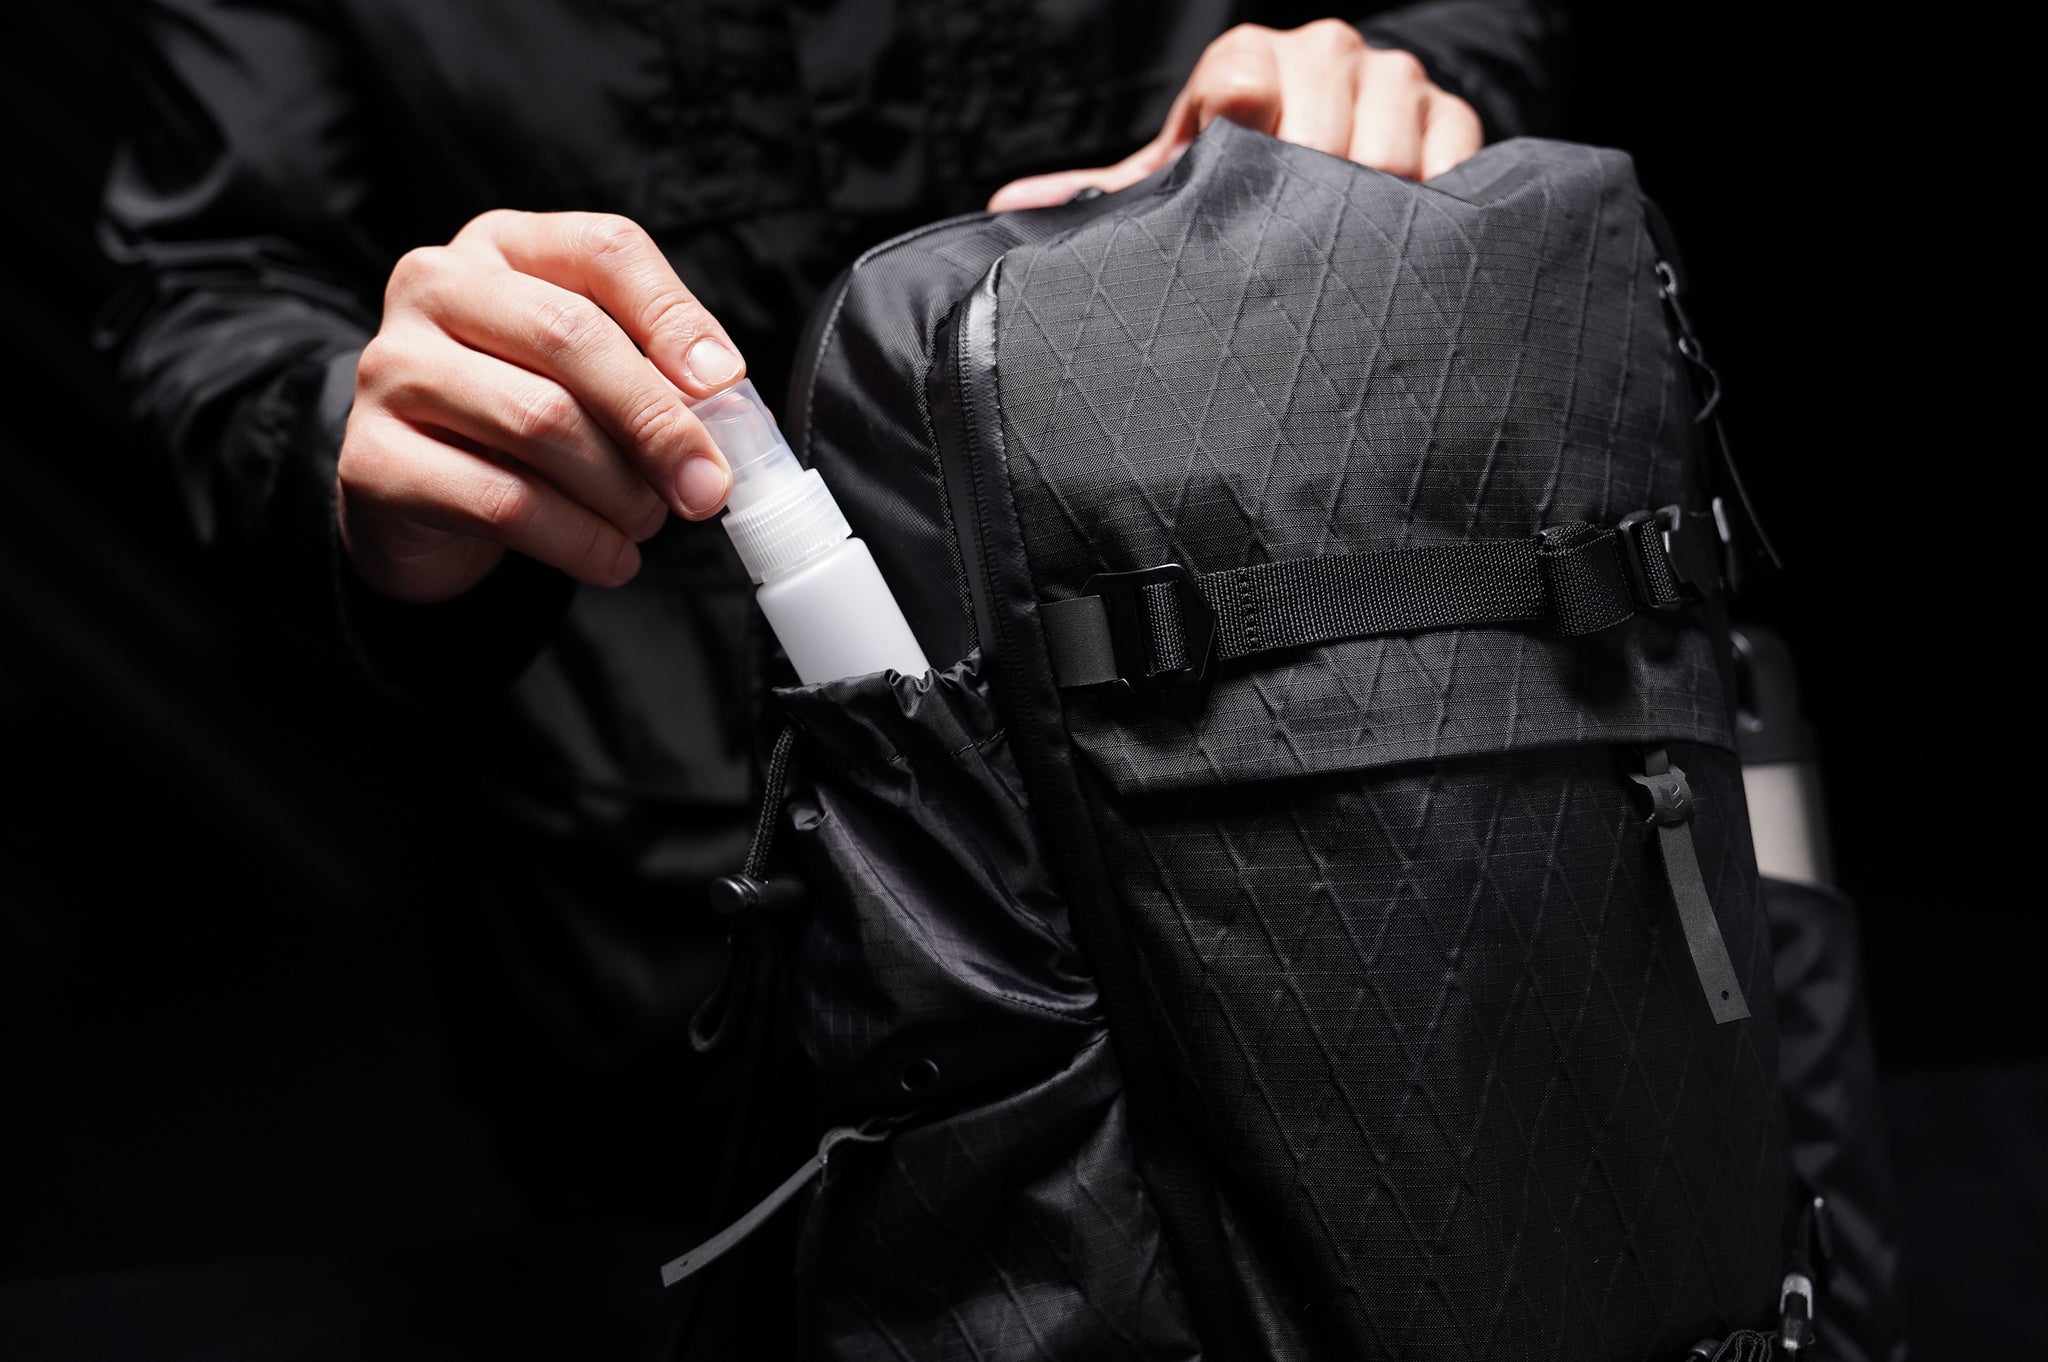 X-TYPE-Backpack drawstring pockets can be put into alcohol bottles (no objects afraid of water)